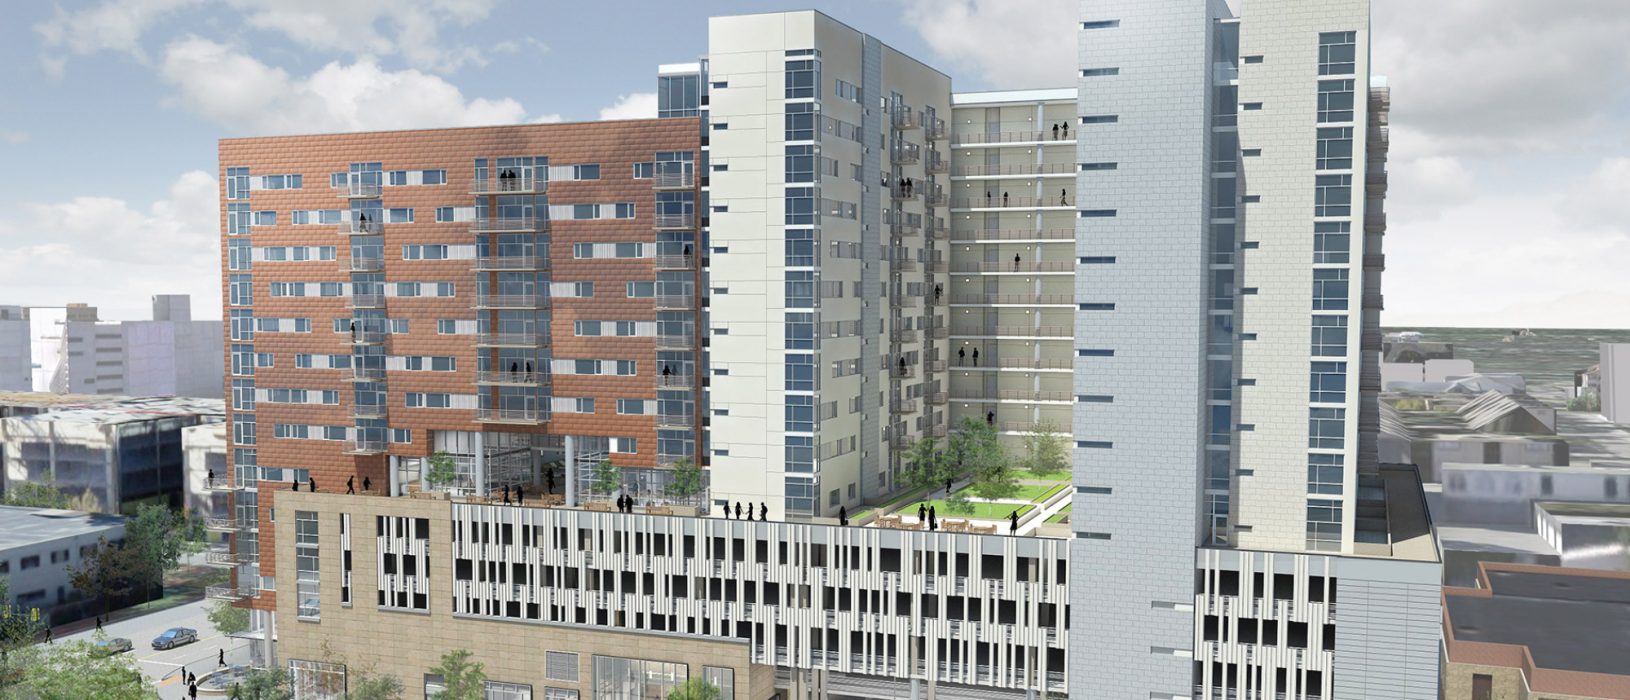 2400 Nueces Residences/ Mixed Use Campus Housing – University of Texas at Austin